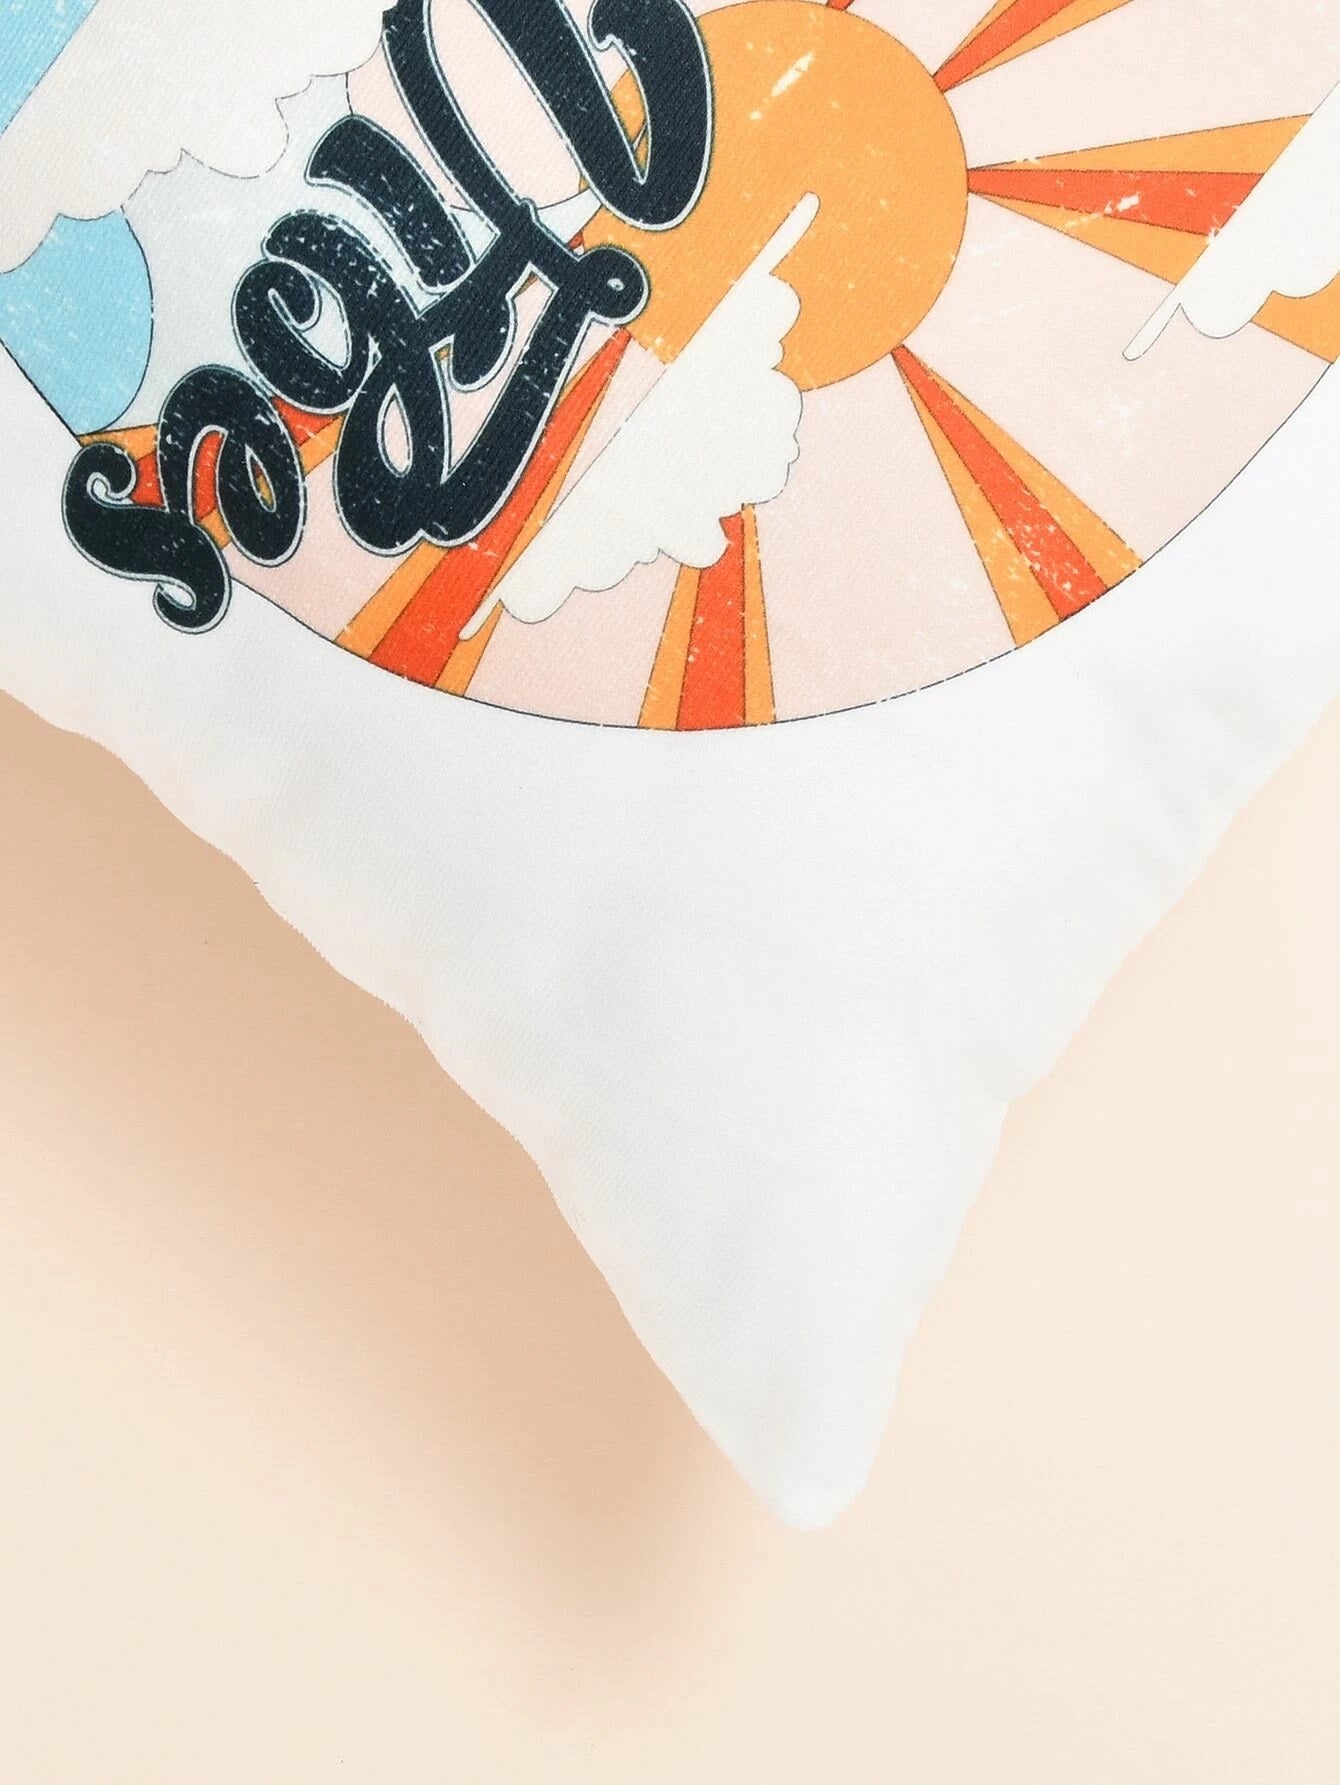 Good Vibes Scatter Cushion